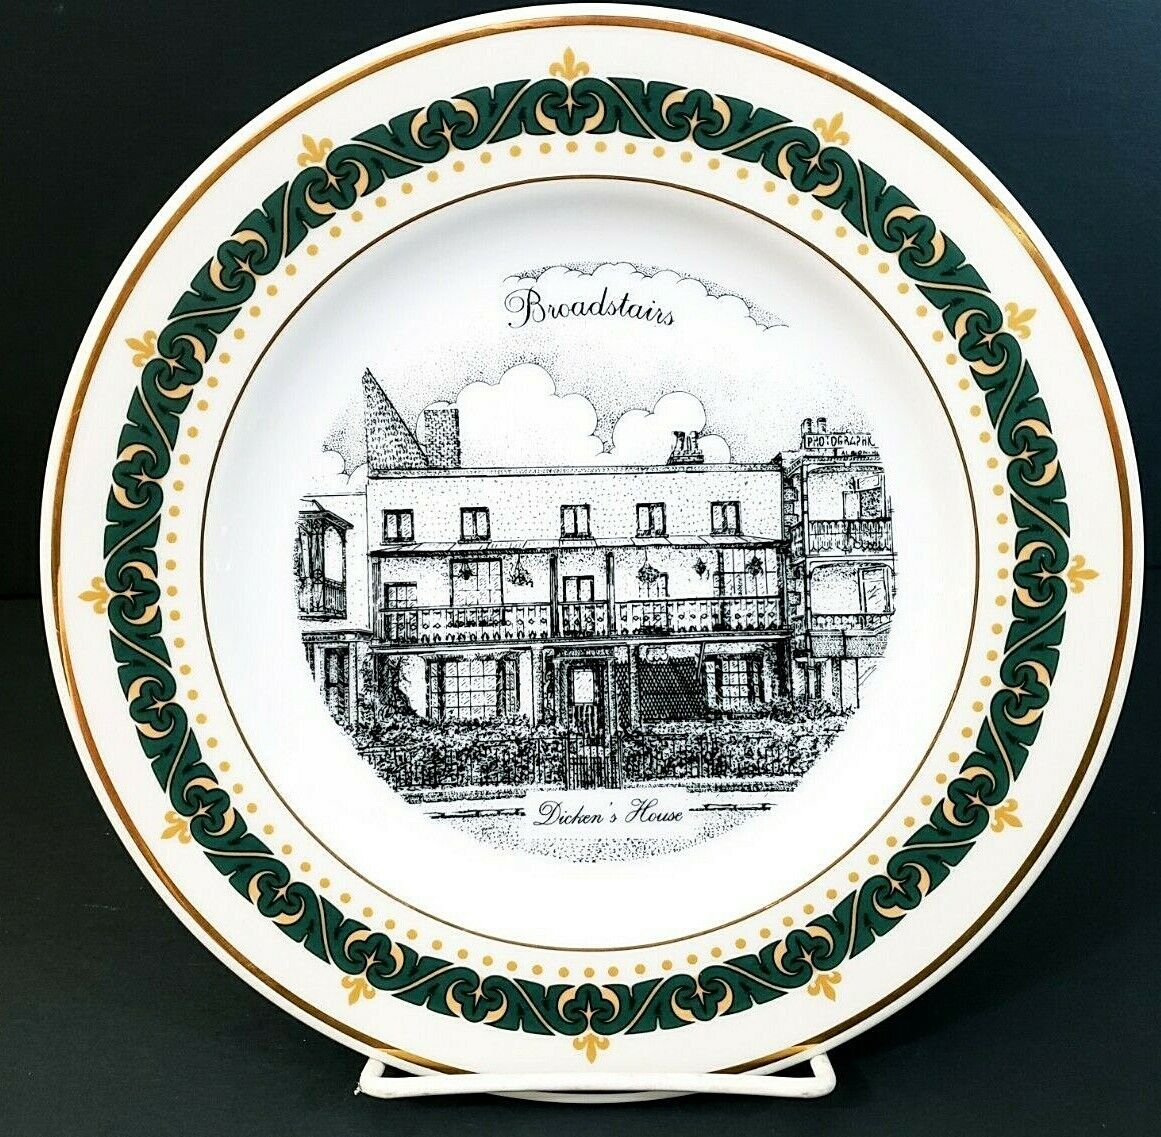 Broadstairs Dicken's House Collector Plate 1995 Gold Rimmed UK Vintage